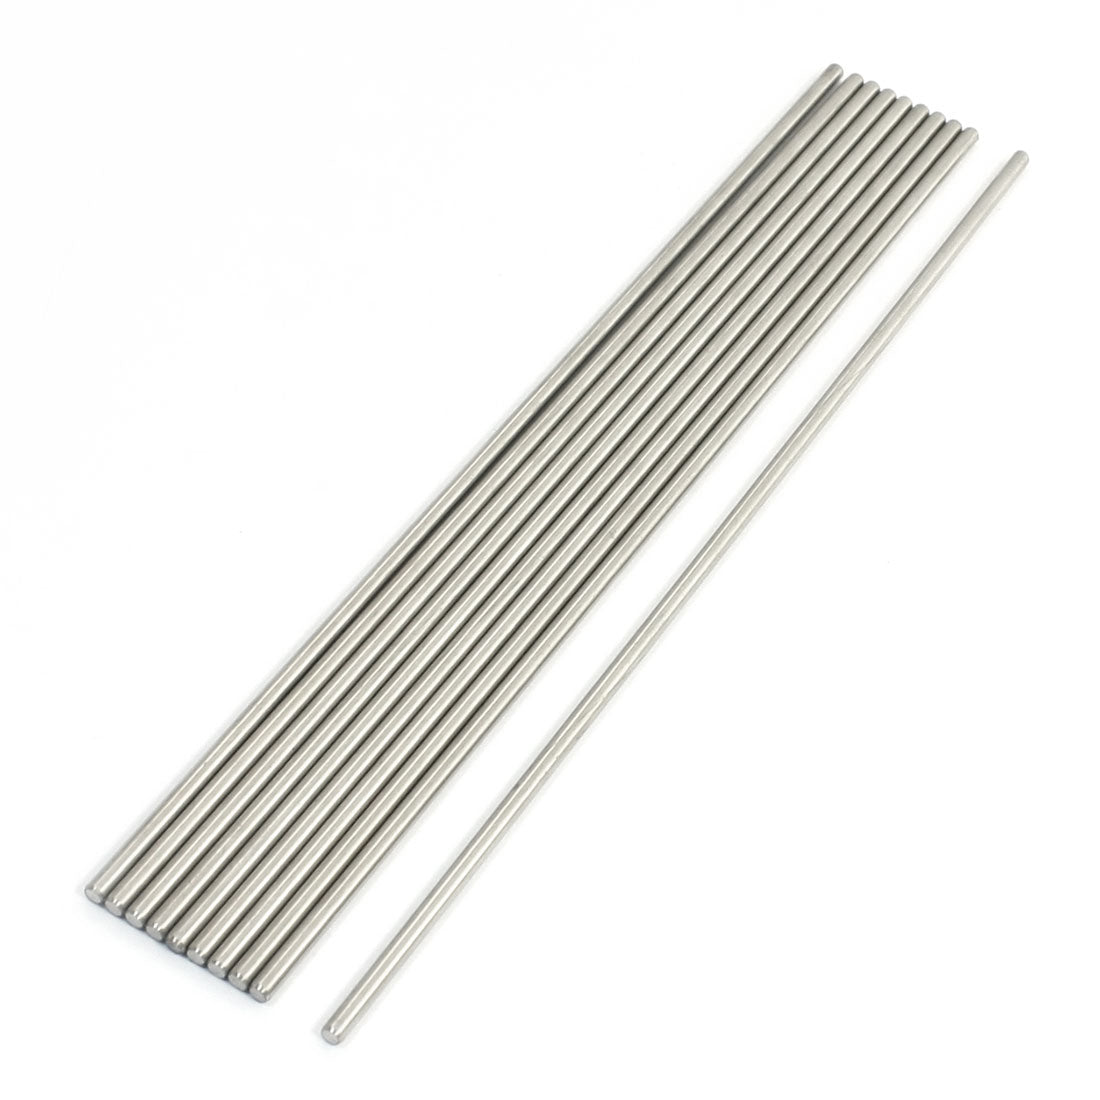 uxcell Uxcell 10Pcs Stainless Steel 200mm x 3mm Round Rod Stock for RC Airplane Model